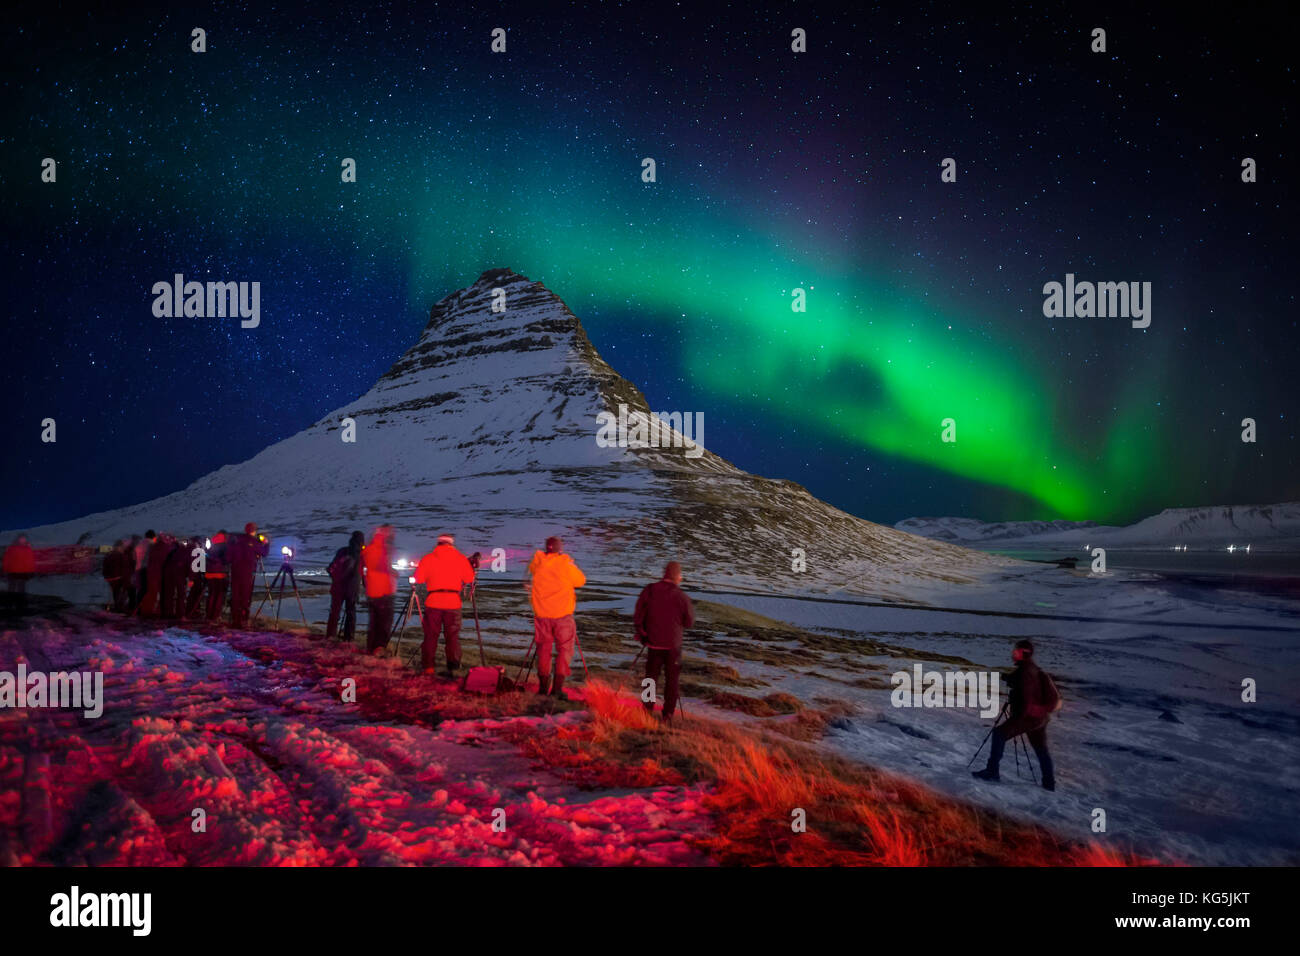 Aurora Borealis or Northern lights over Mt Kirkjufell, Snaefellsnes Peninsula, Iceland Photographing Kirkjufell (Church Mountain) with the Auroras in Grundarfjordur, on the north side of Snaefellsnes Peninsula, Iceland Stock Photo